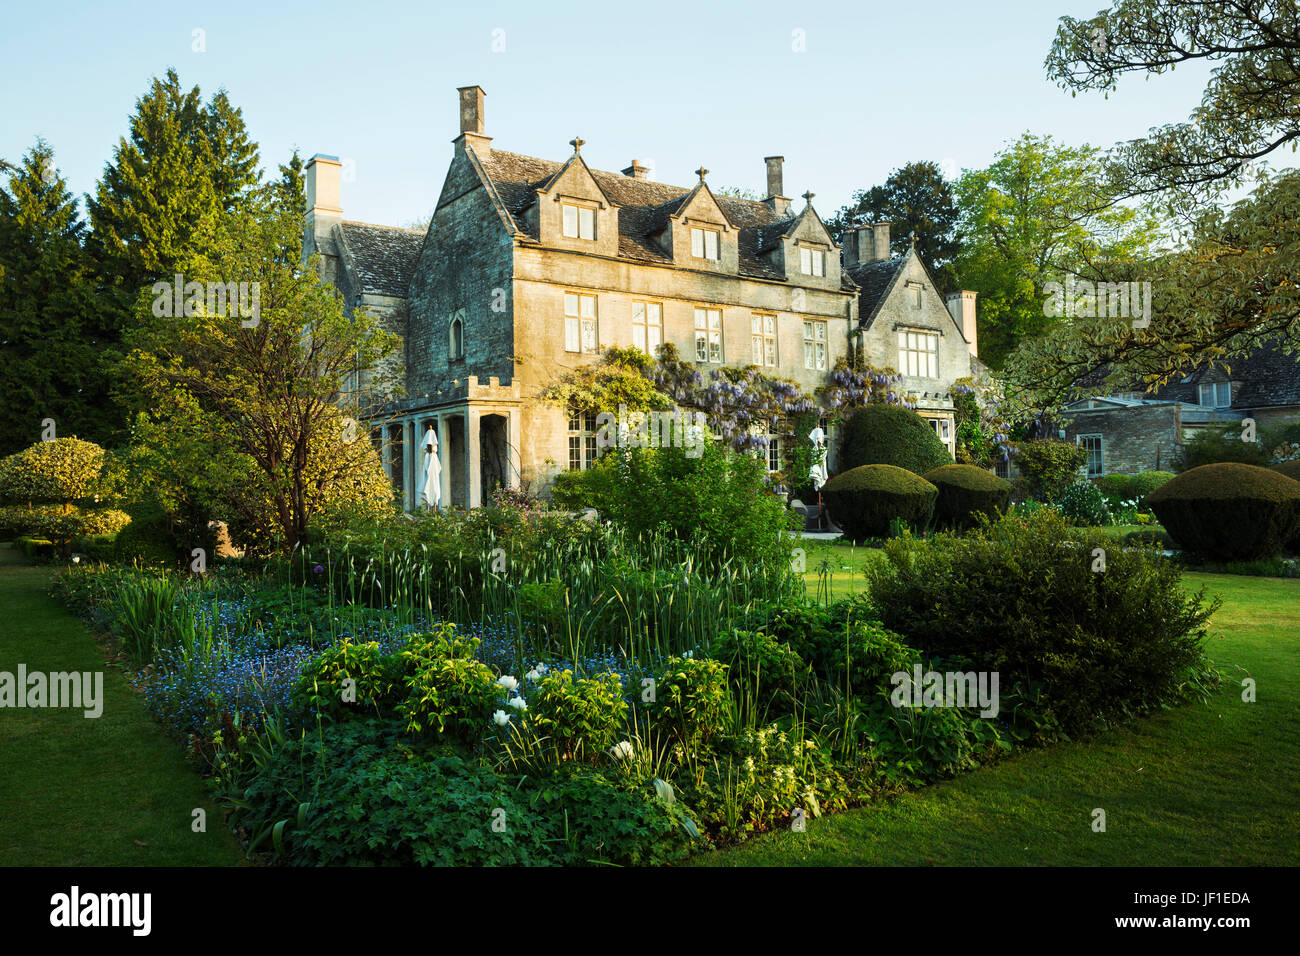 Exterior view of a 17th century country house from a garden with flower beds, shrubs and trees. Stock Photo